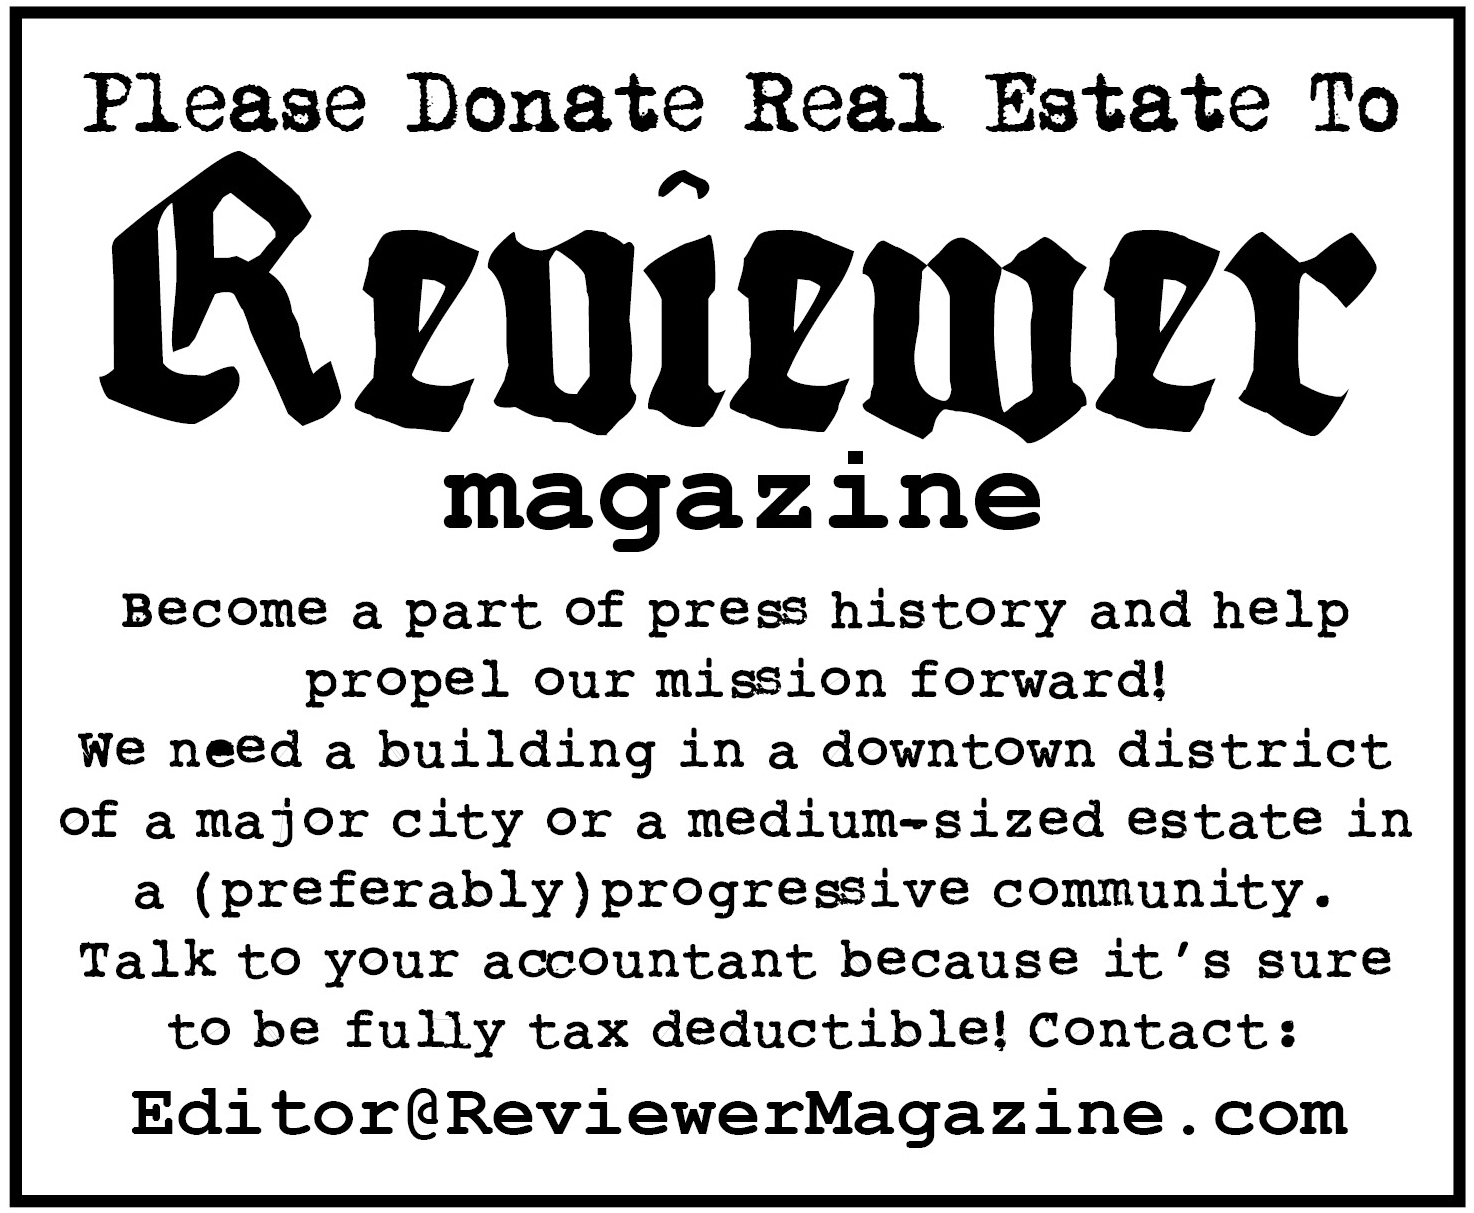 Donate real estate or cash to Reviewer Magazine, email editor@reviewermagazine.com.